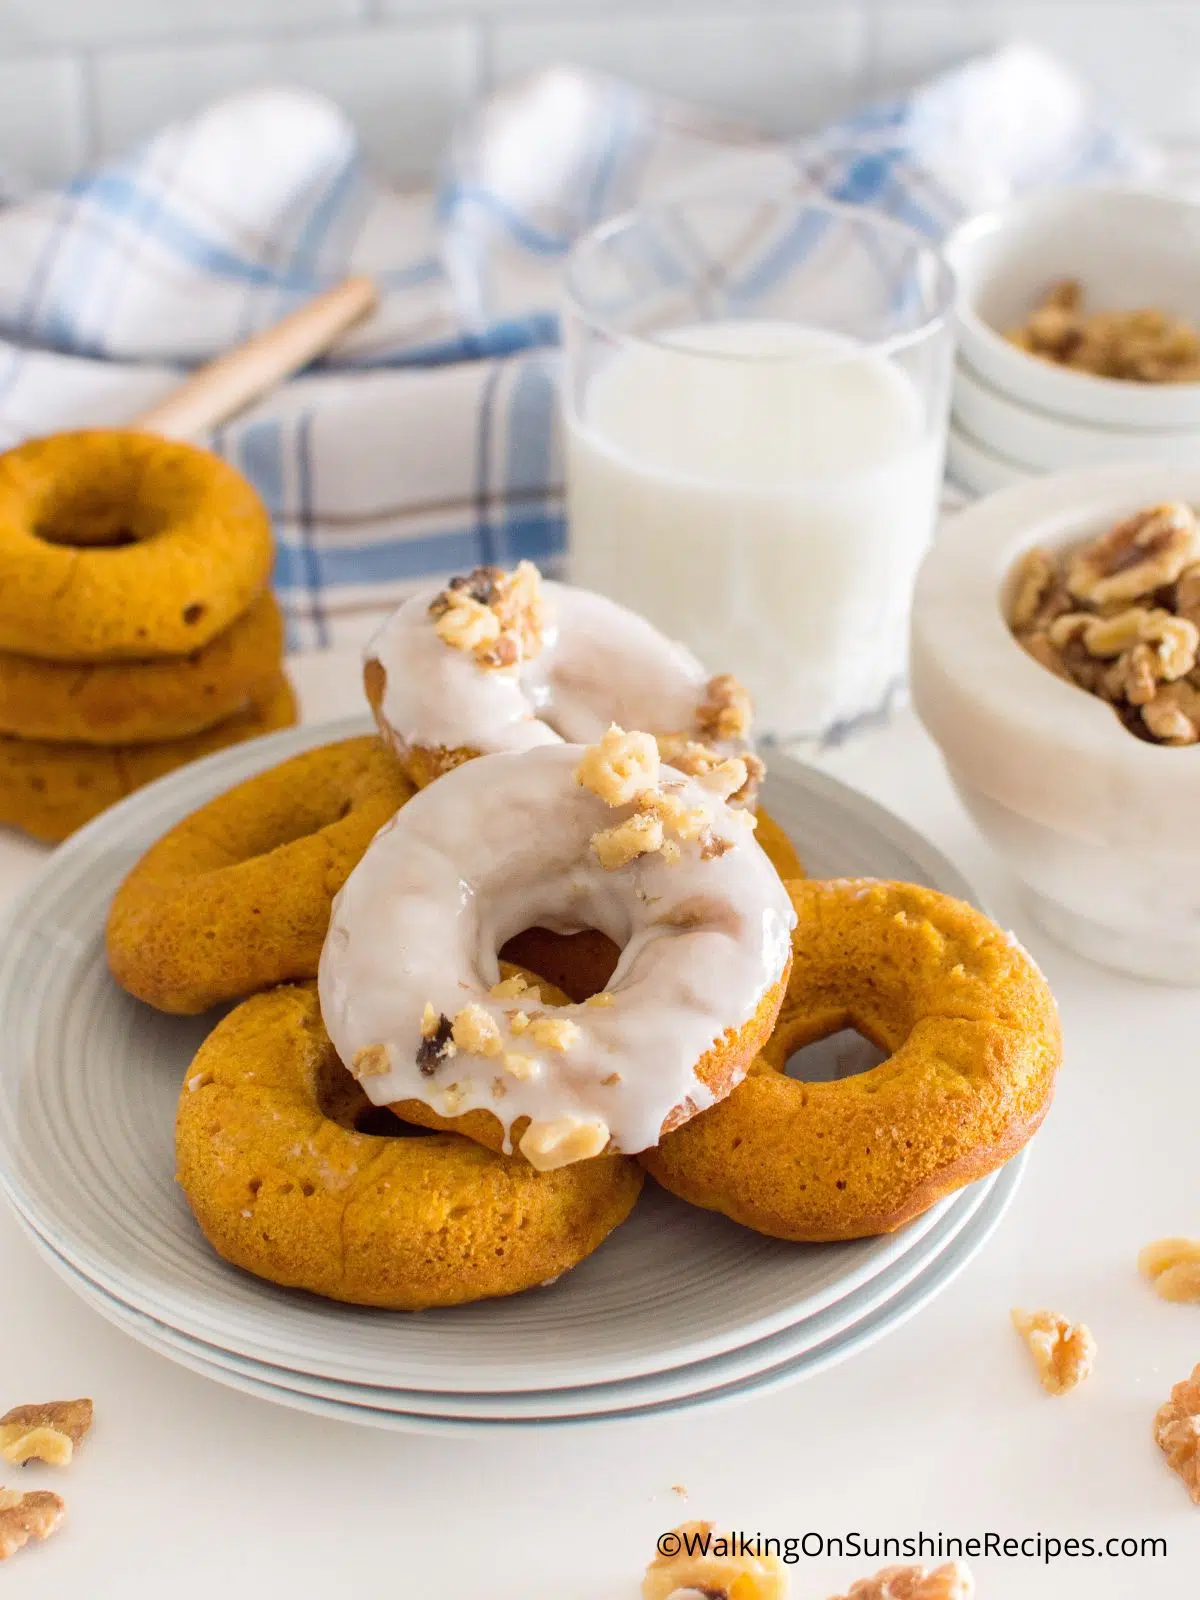 Homemade pumpkin donuts served on plate with glass of milk.